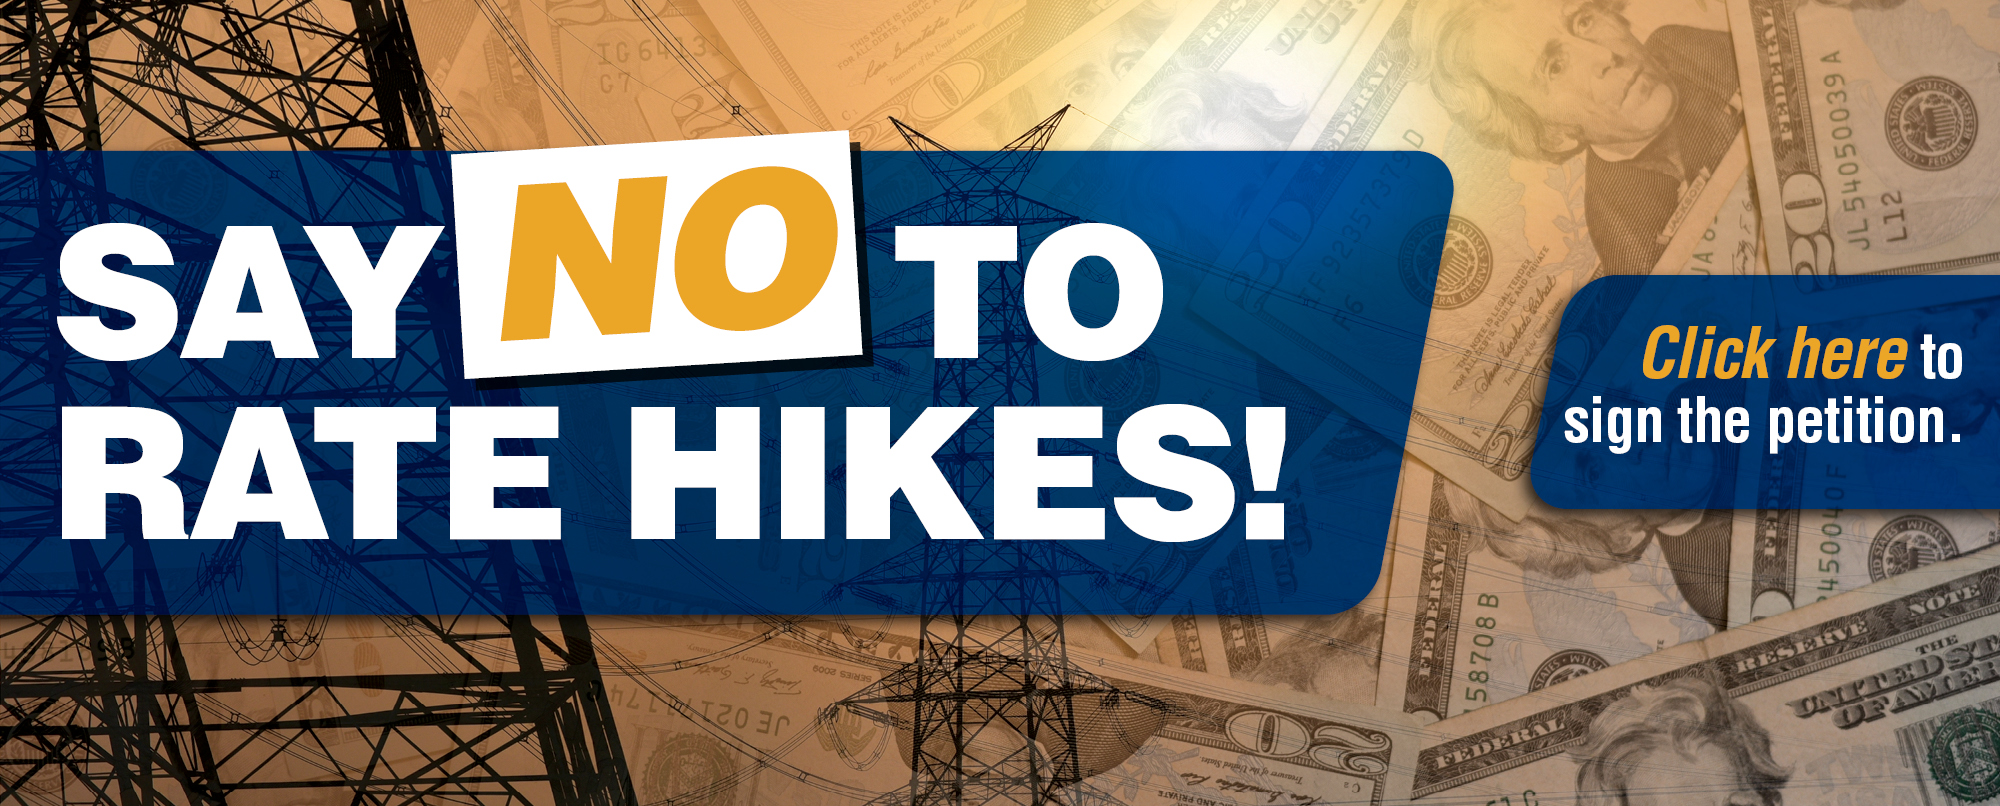 Tell the Public Service Commission: NO to ConEd Rate Hikes!